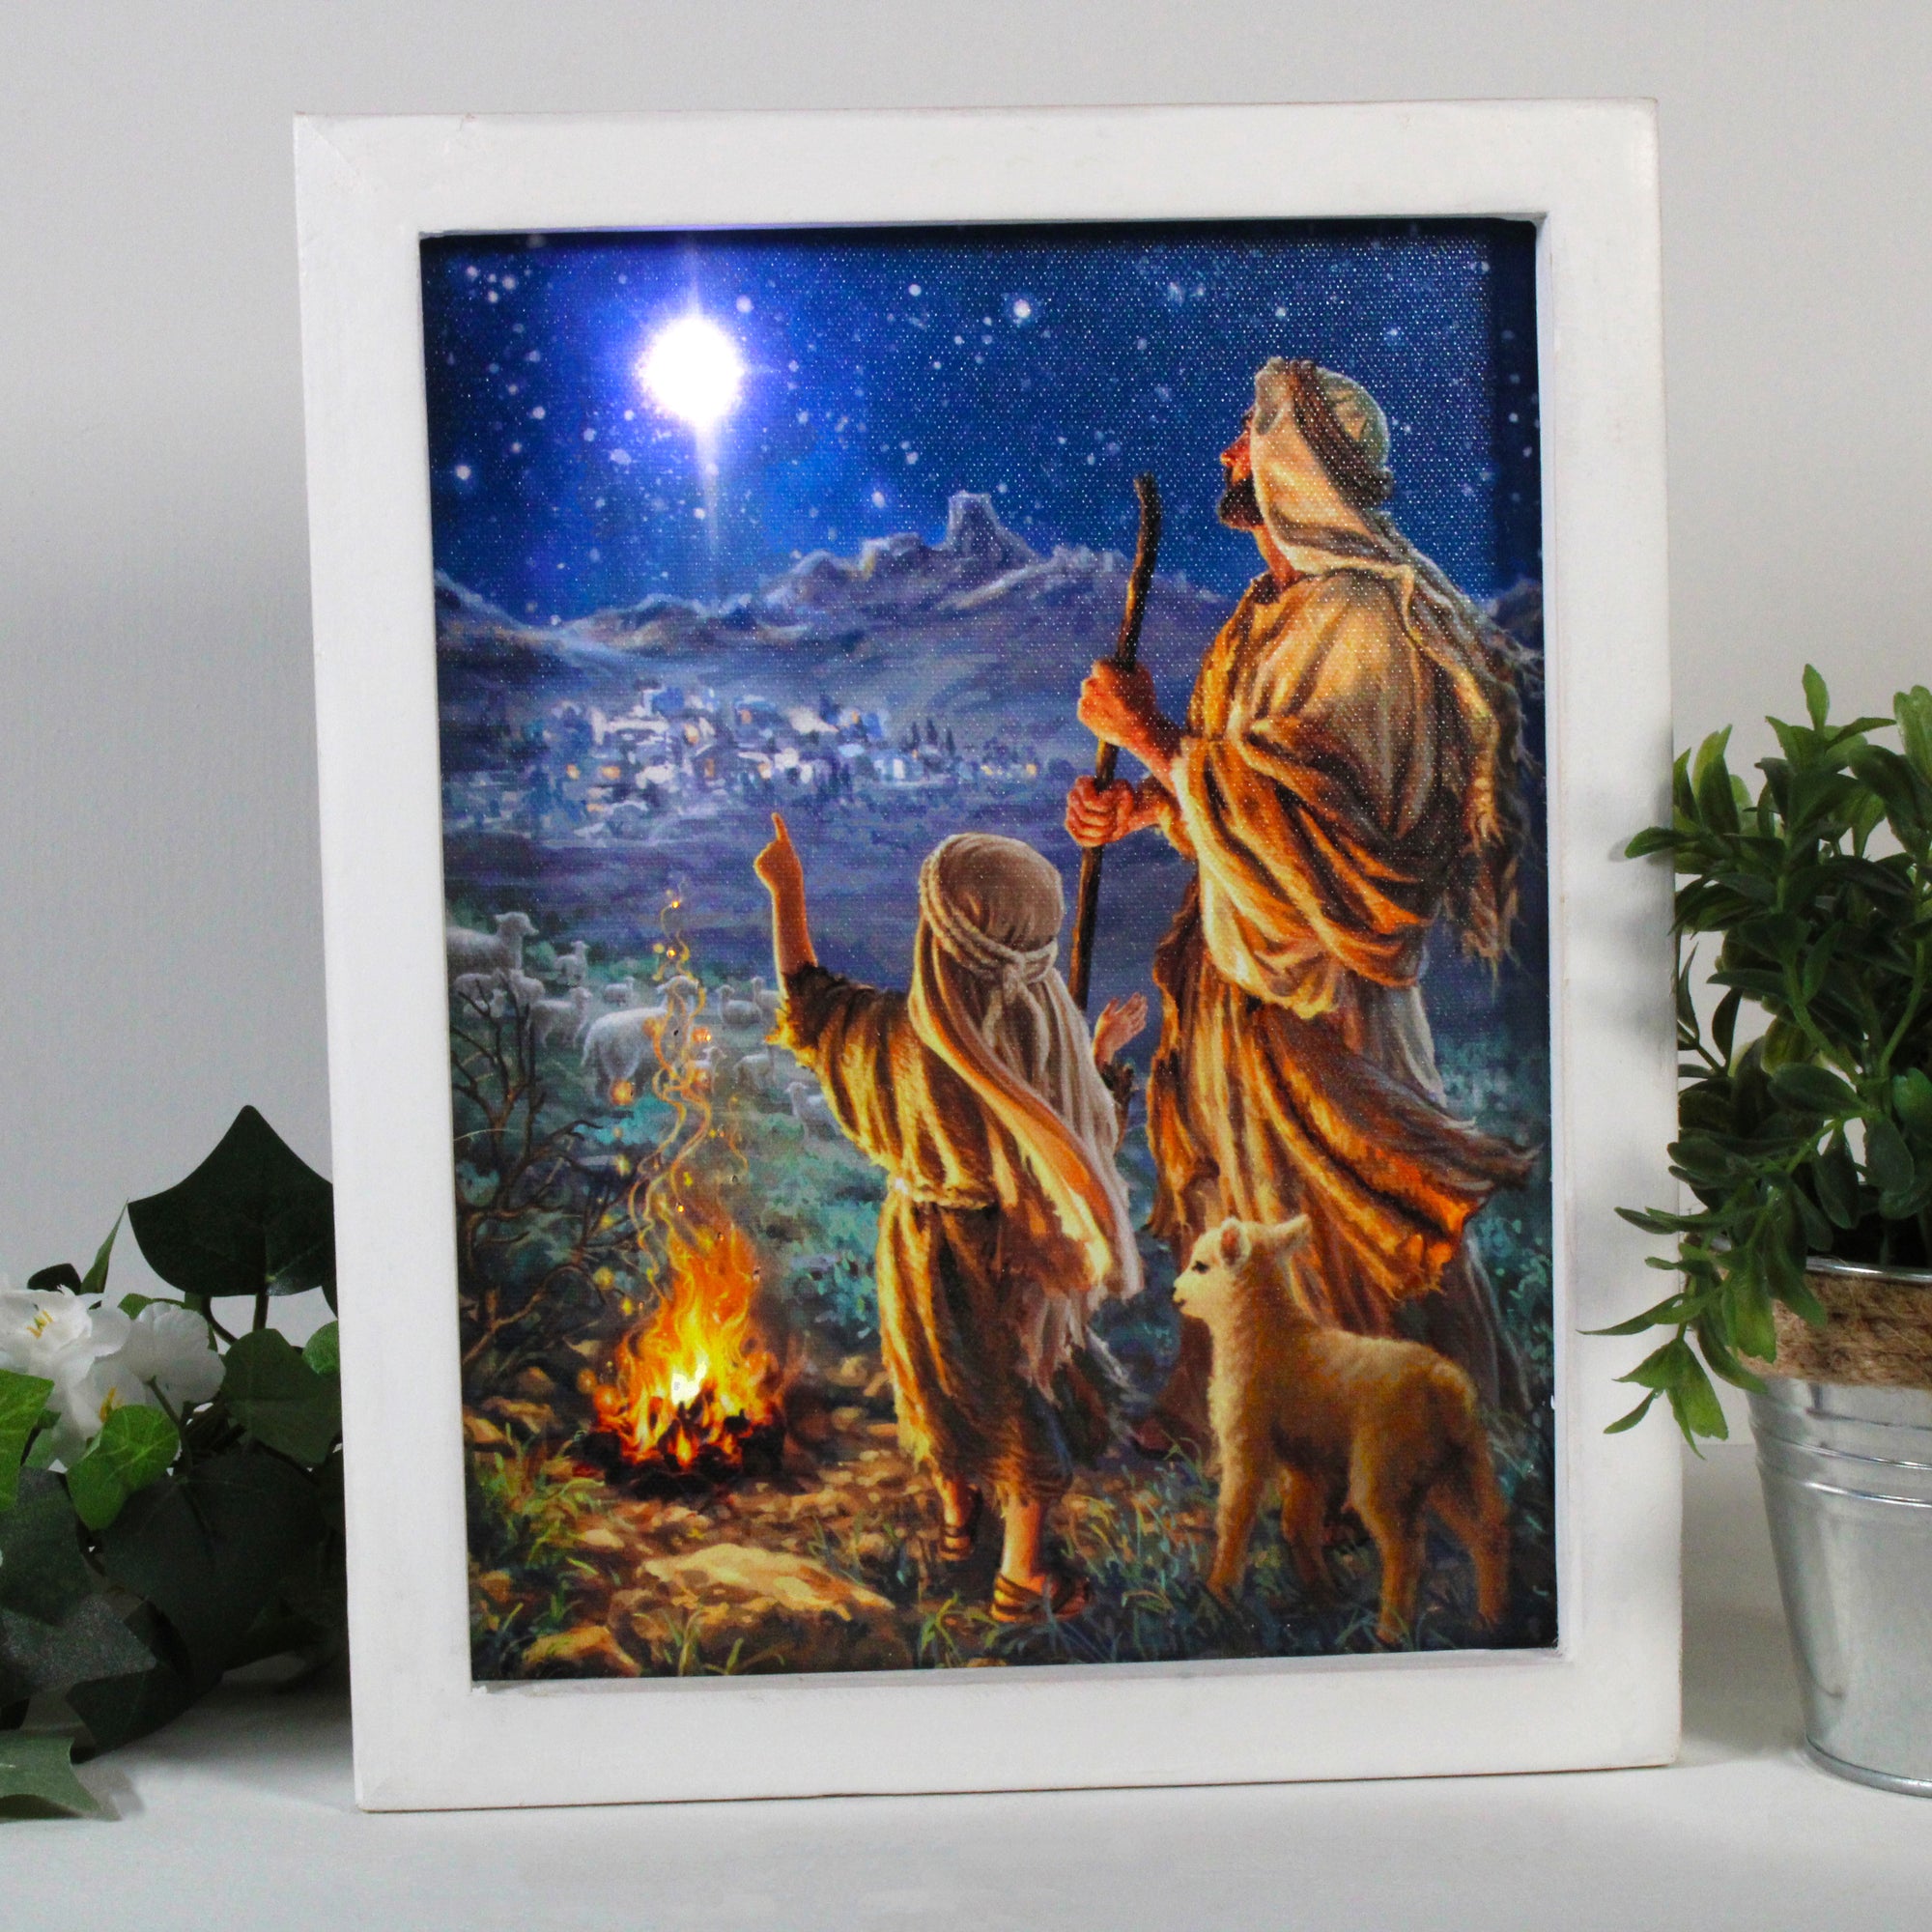 The scene before you depicts a tender moment shared between a shepherd and his son, as they stand by a cozy fire on a peaceful winter night. A gentle lamb stands between them, their faithful companion and a symbol of innocence and purity.  In the distance, you can see a small town nestled in the valley, bathed in a soft glow from the starry sky above. And there, high above the town, shines a single star, bright and radiant, a beacon of hope and guidance for all who seek it.